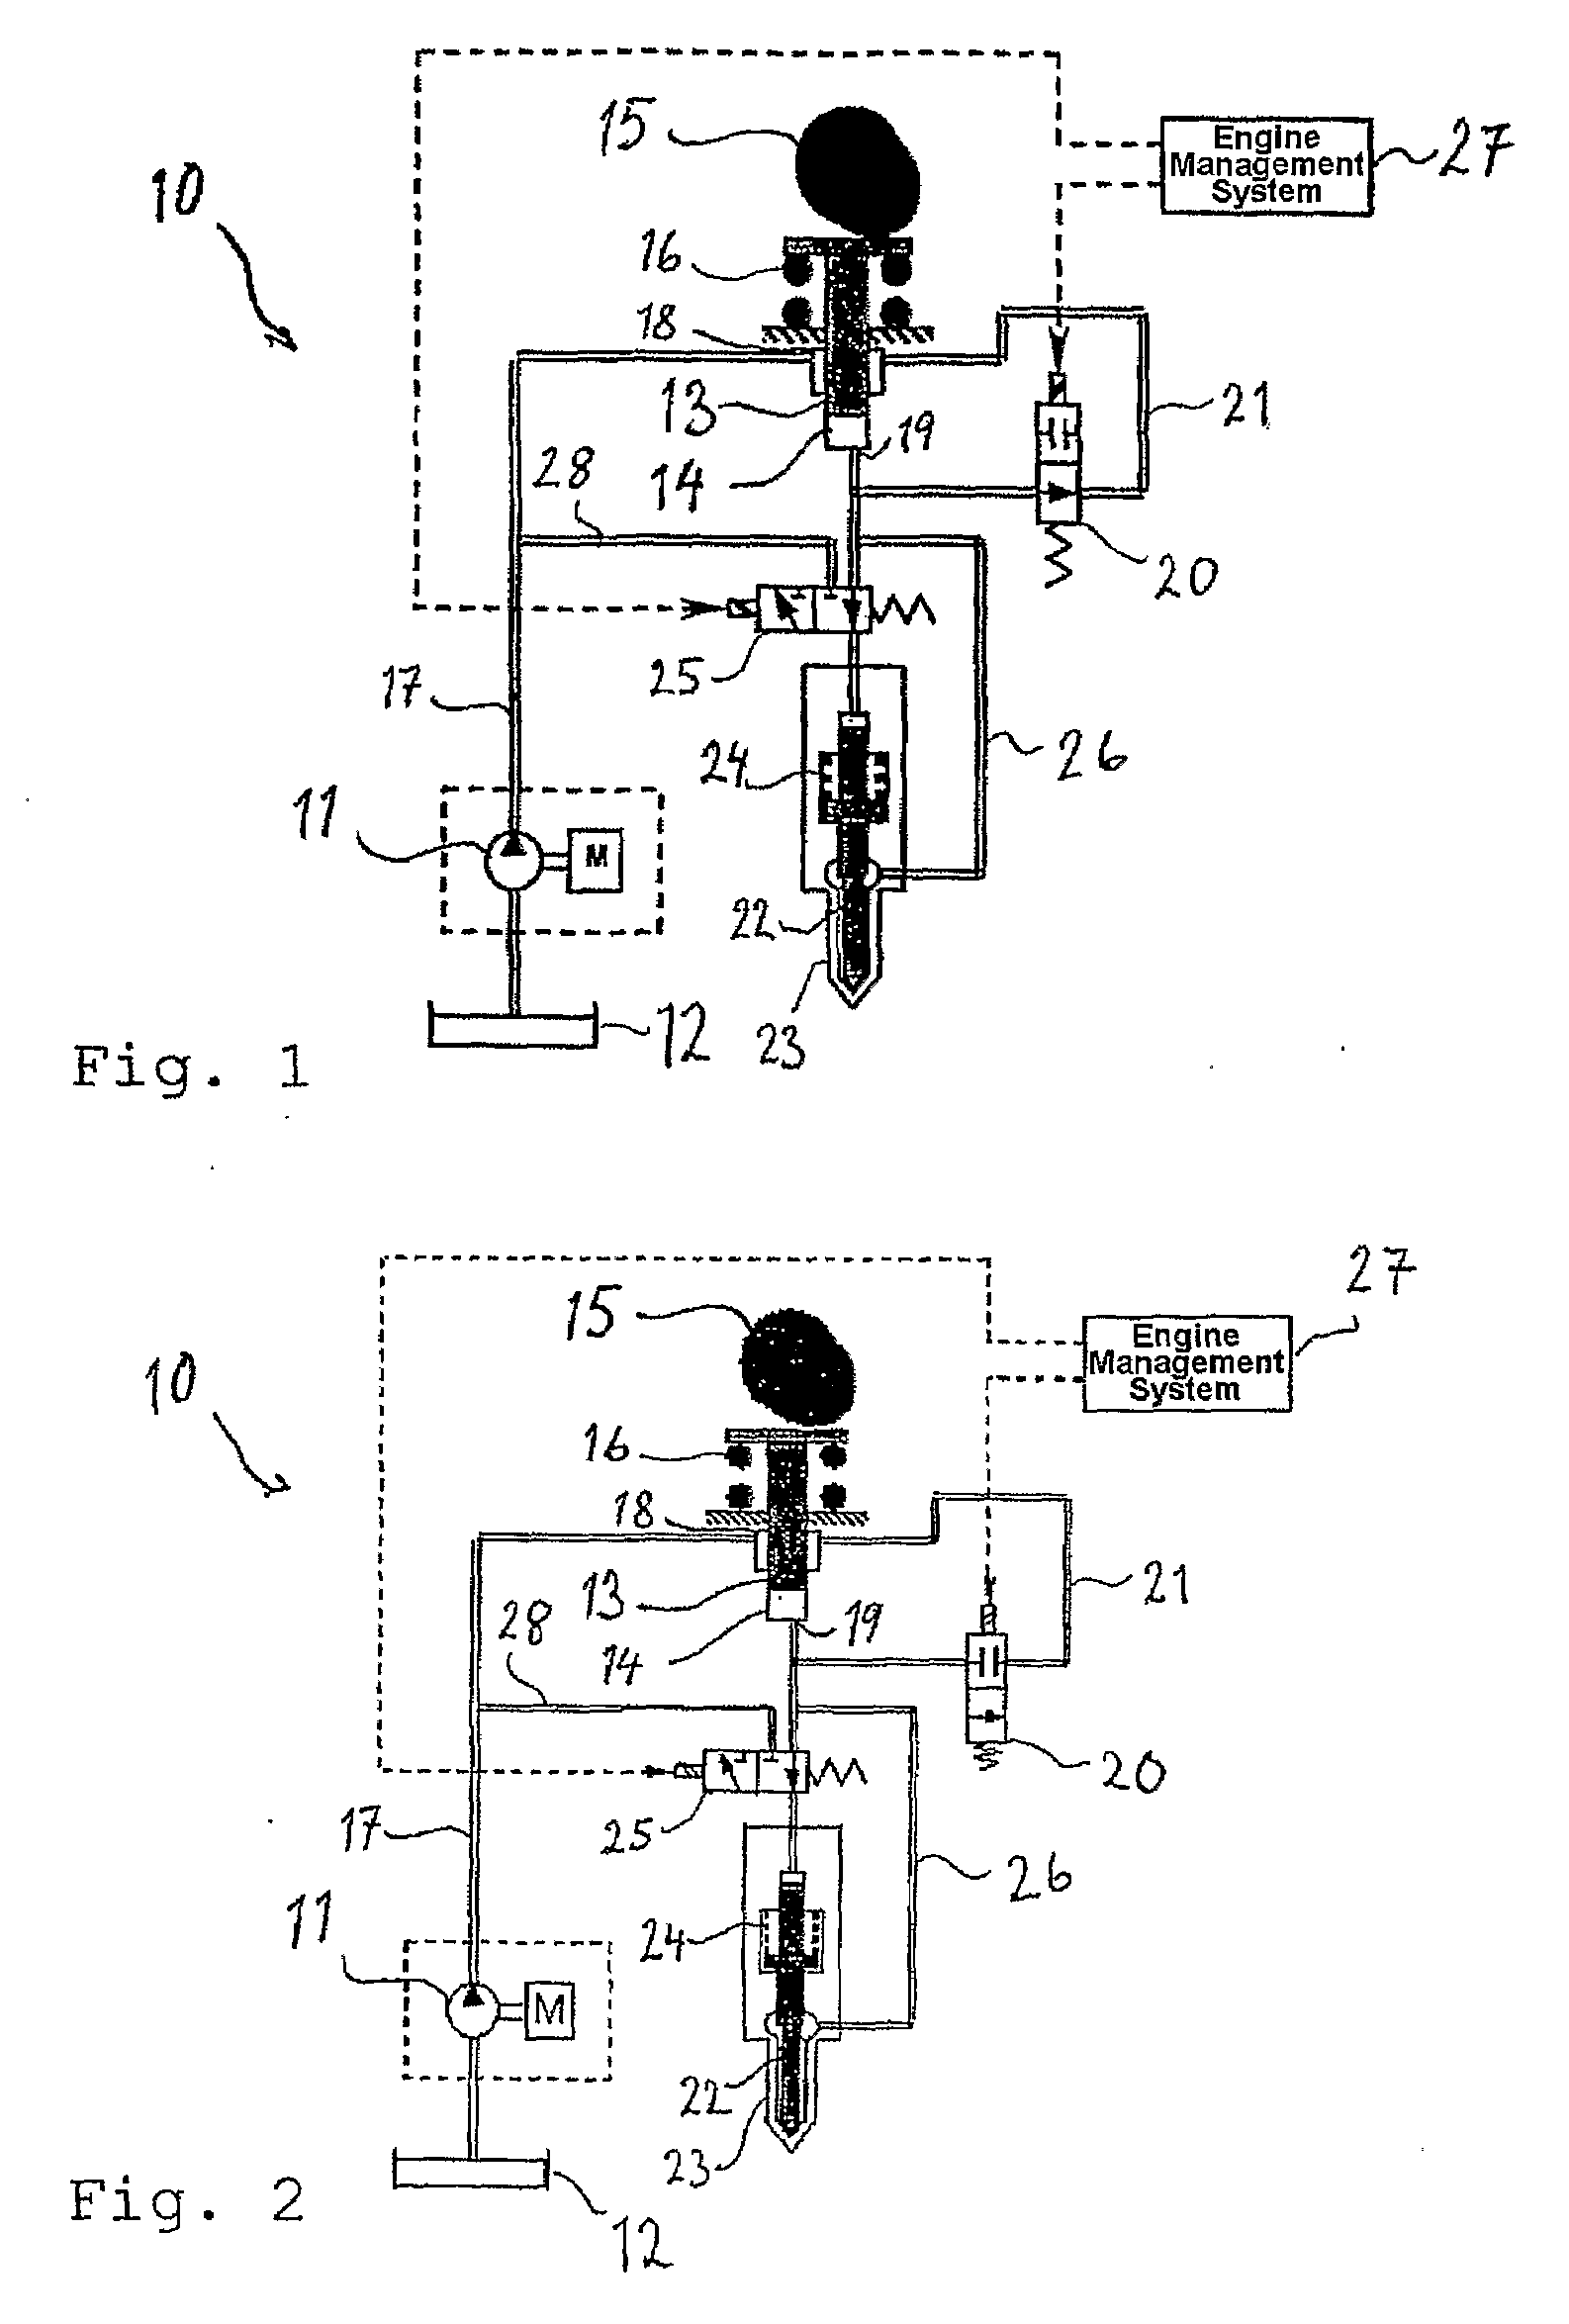 Method for Controlling a Fuel Injector